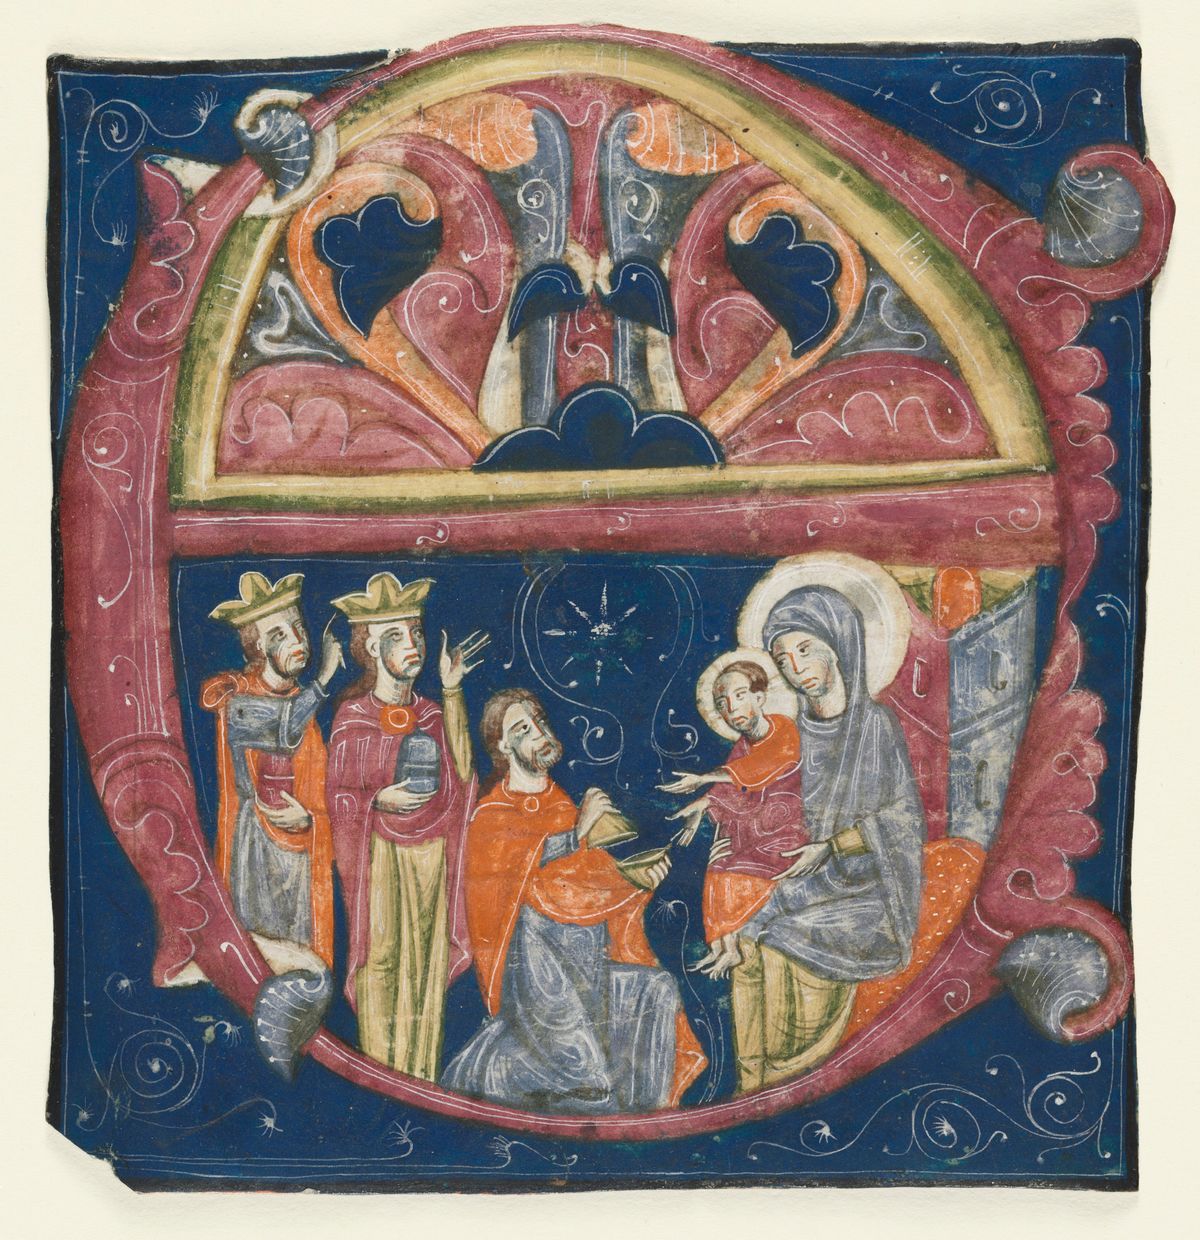 Historiated Initial (E) Excised from a Gradual: Adoration of the Magi (1200–1240 Italy, Siena) - Public Domain Catholic Painting